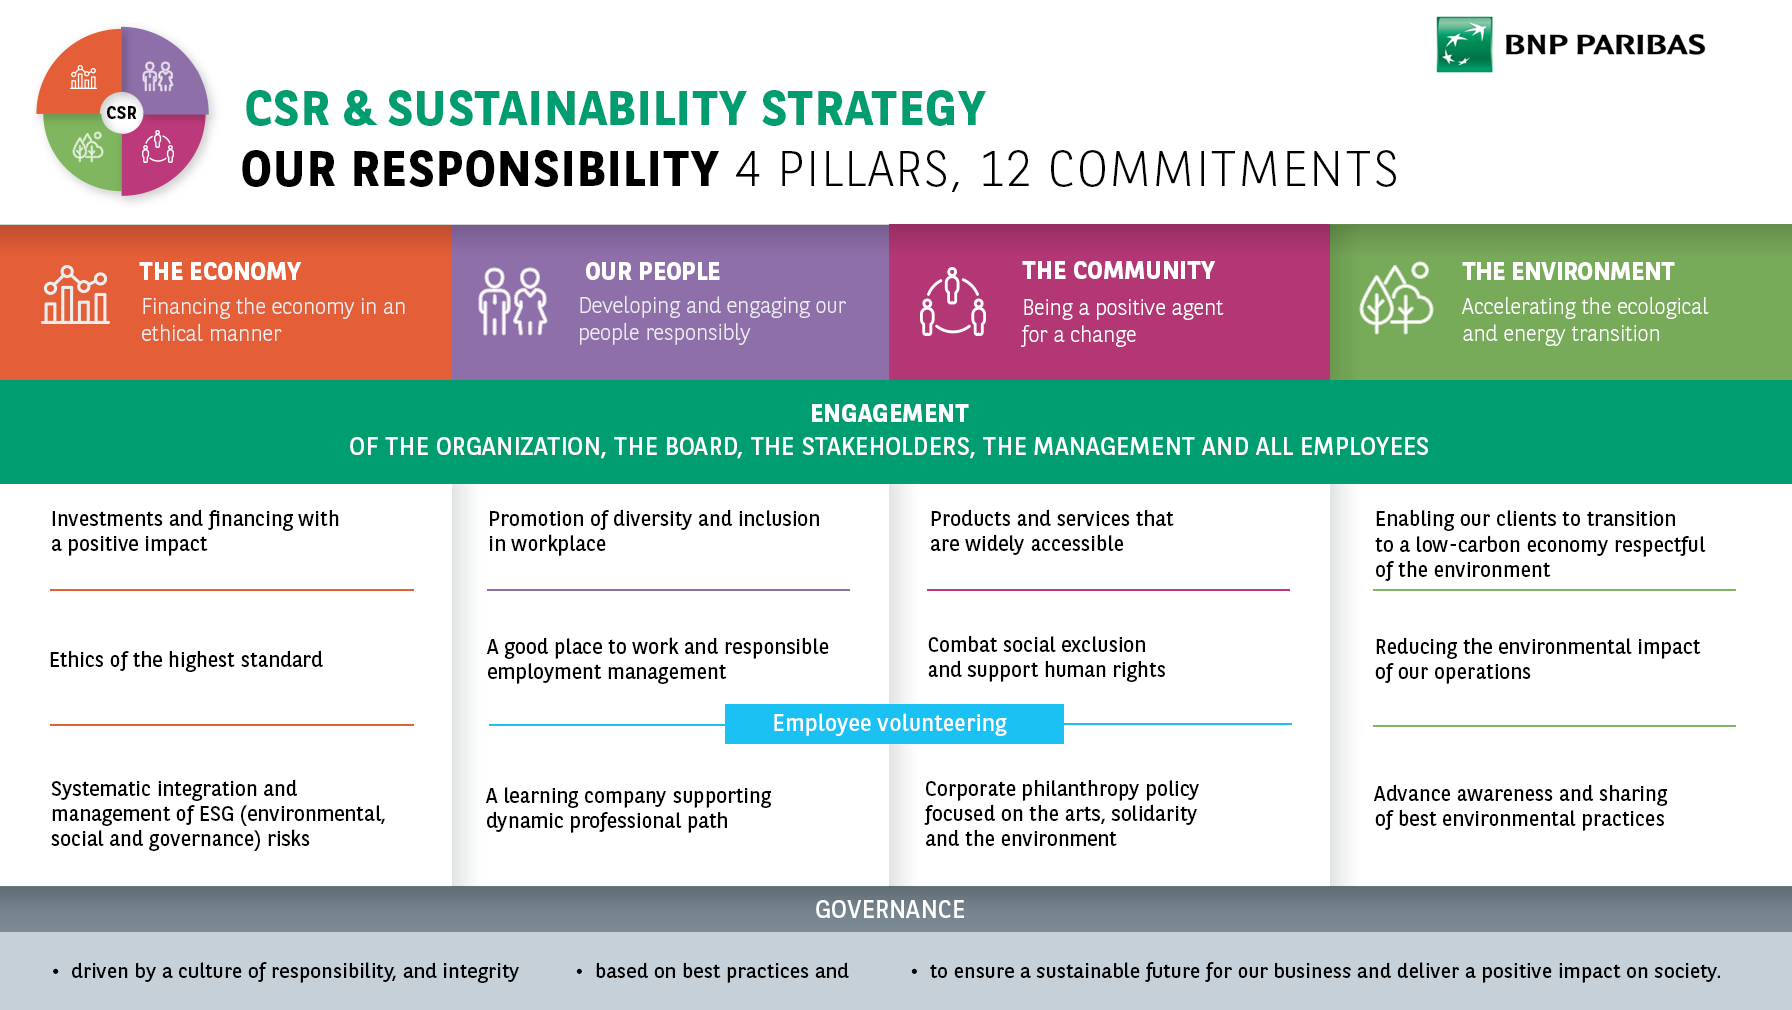 CSR and Sustainability Strategy of Bank BNP Paribas